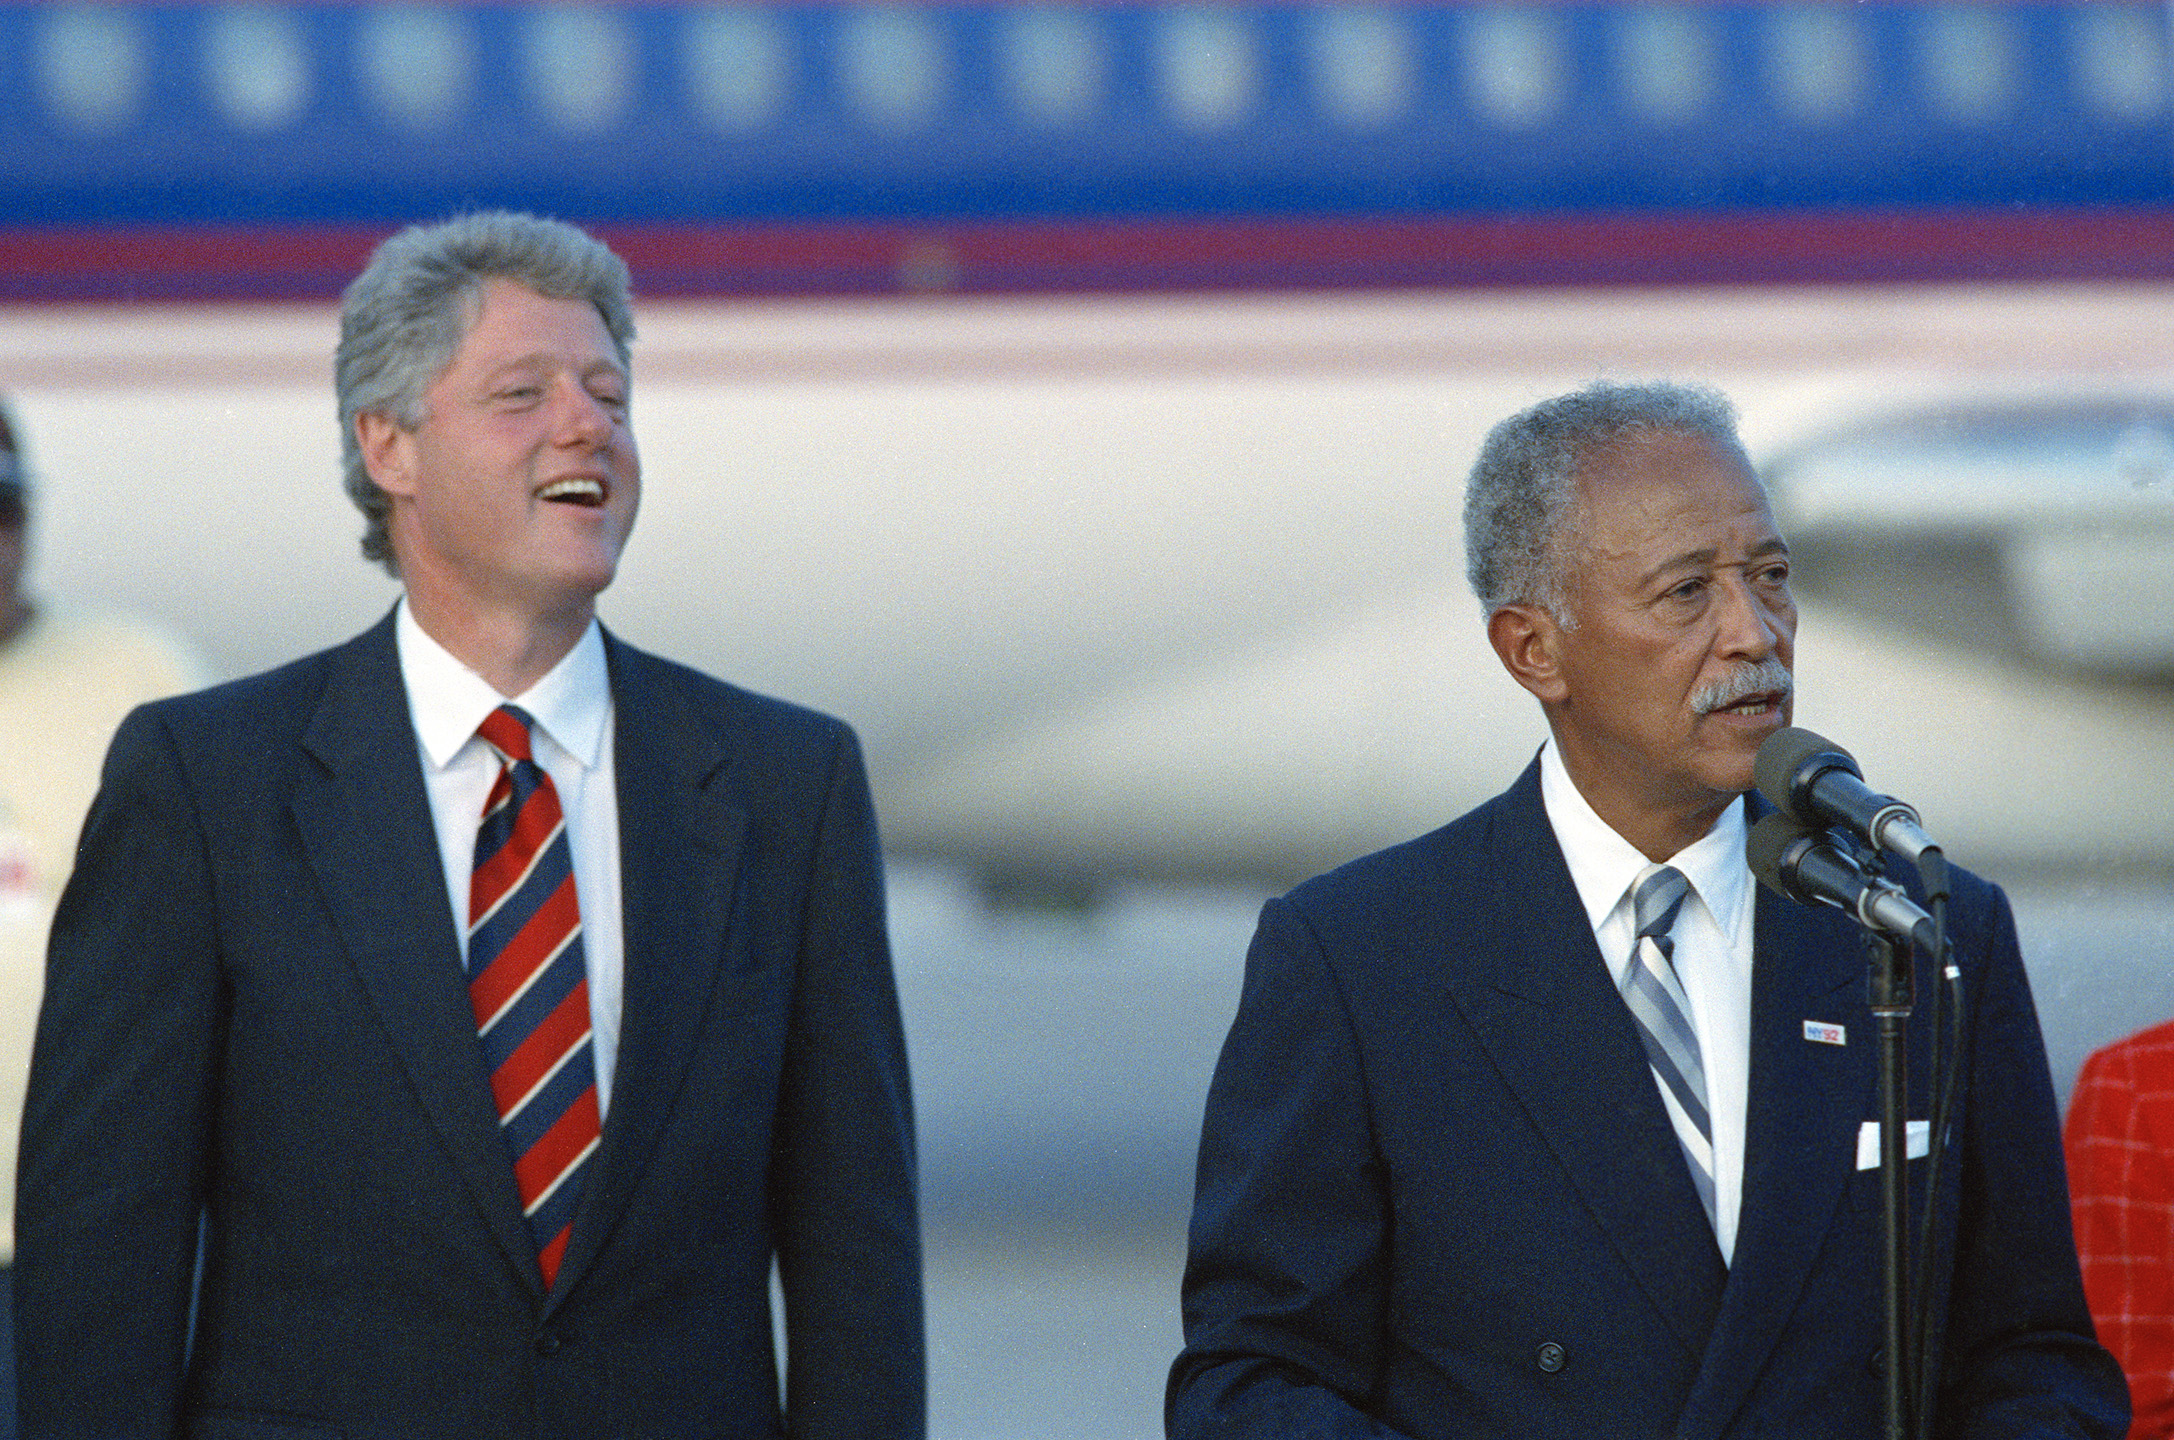 Governor Bill Clinton and Mayor Dinkins